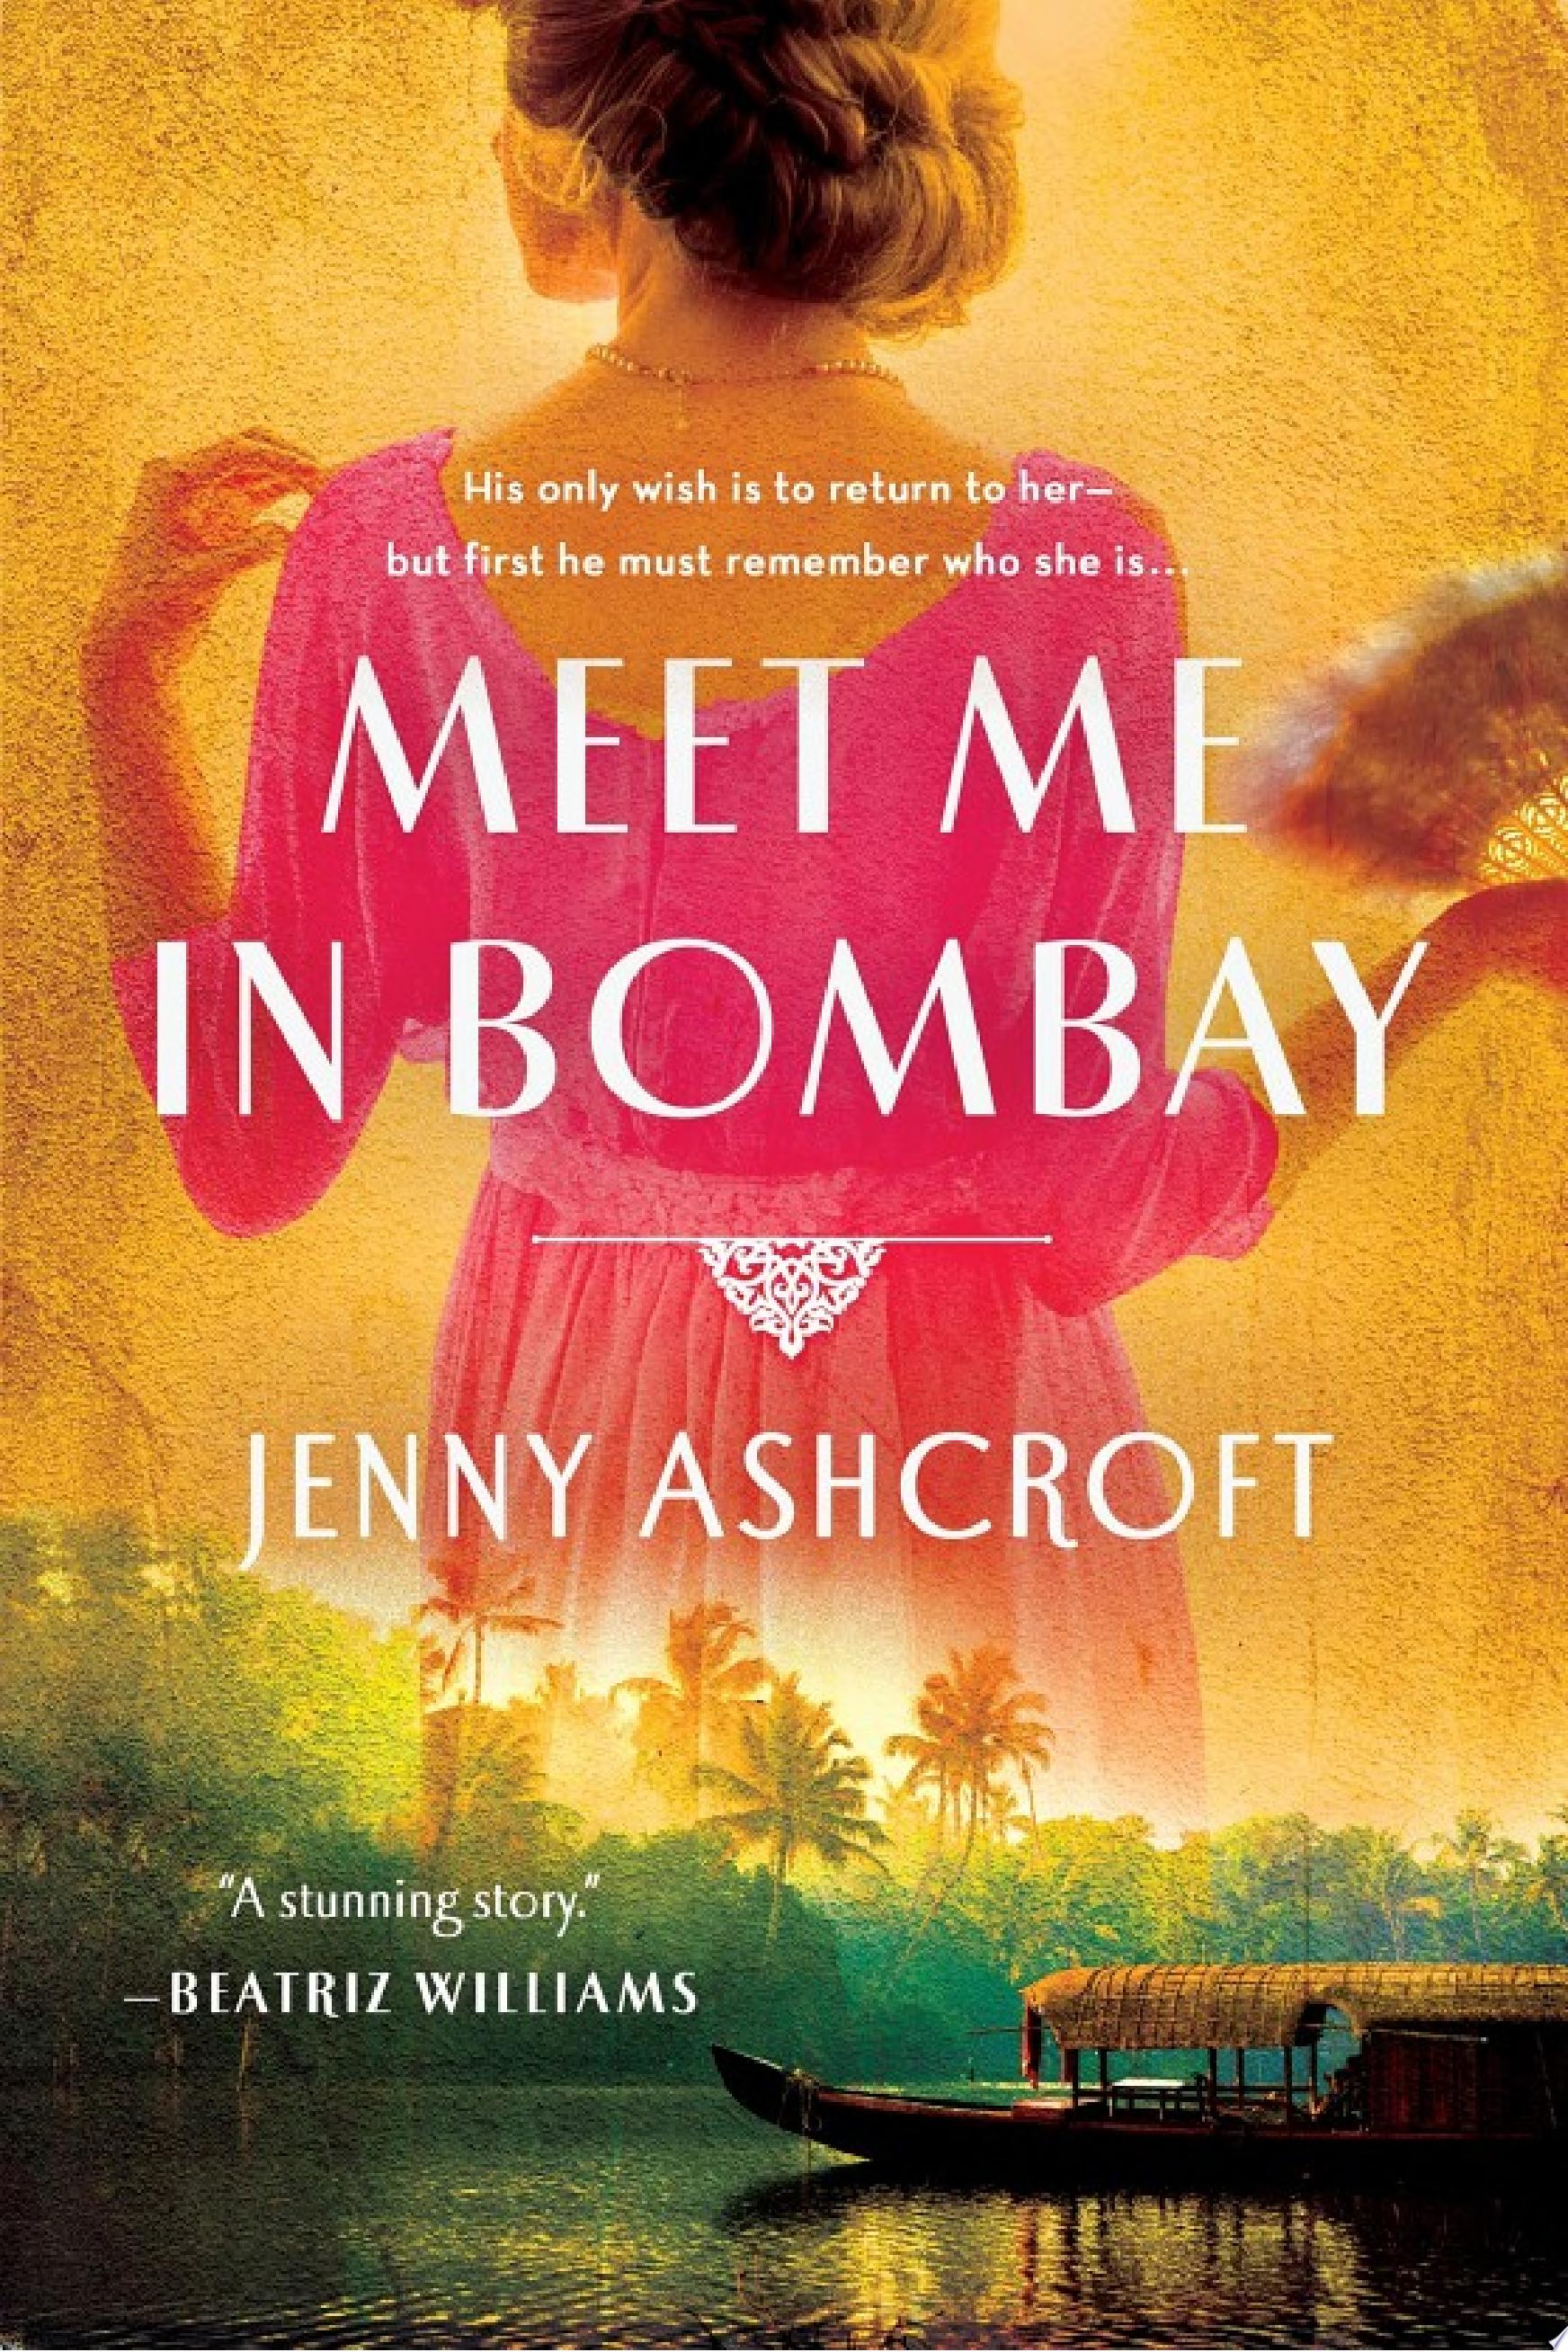 Image for "Meet Me in Bombay"